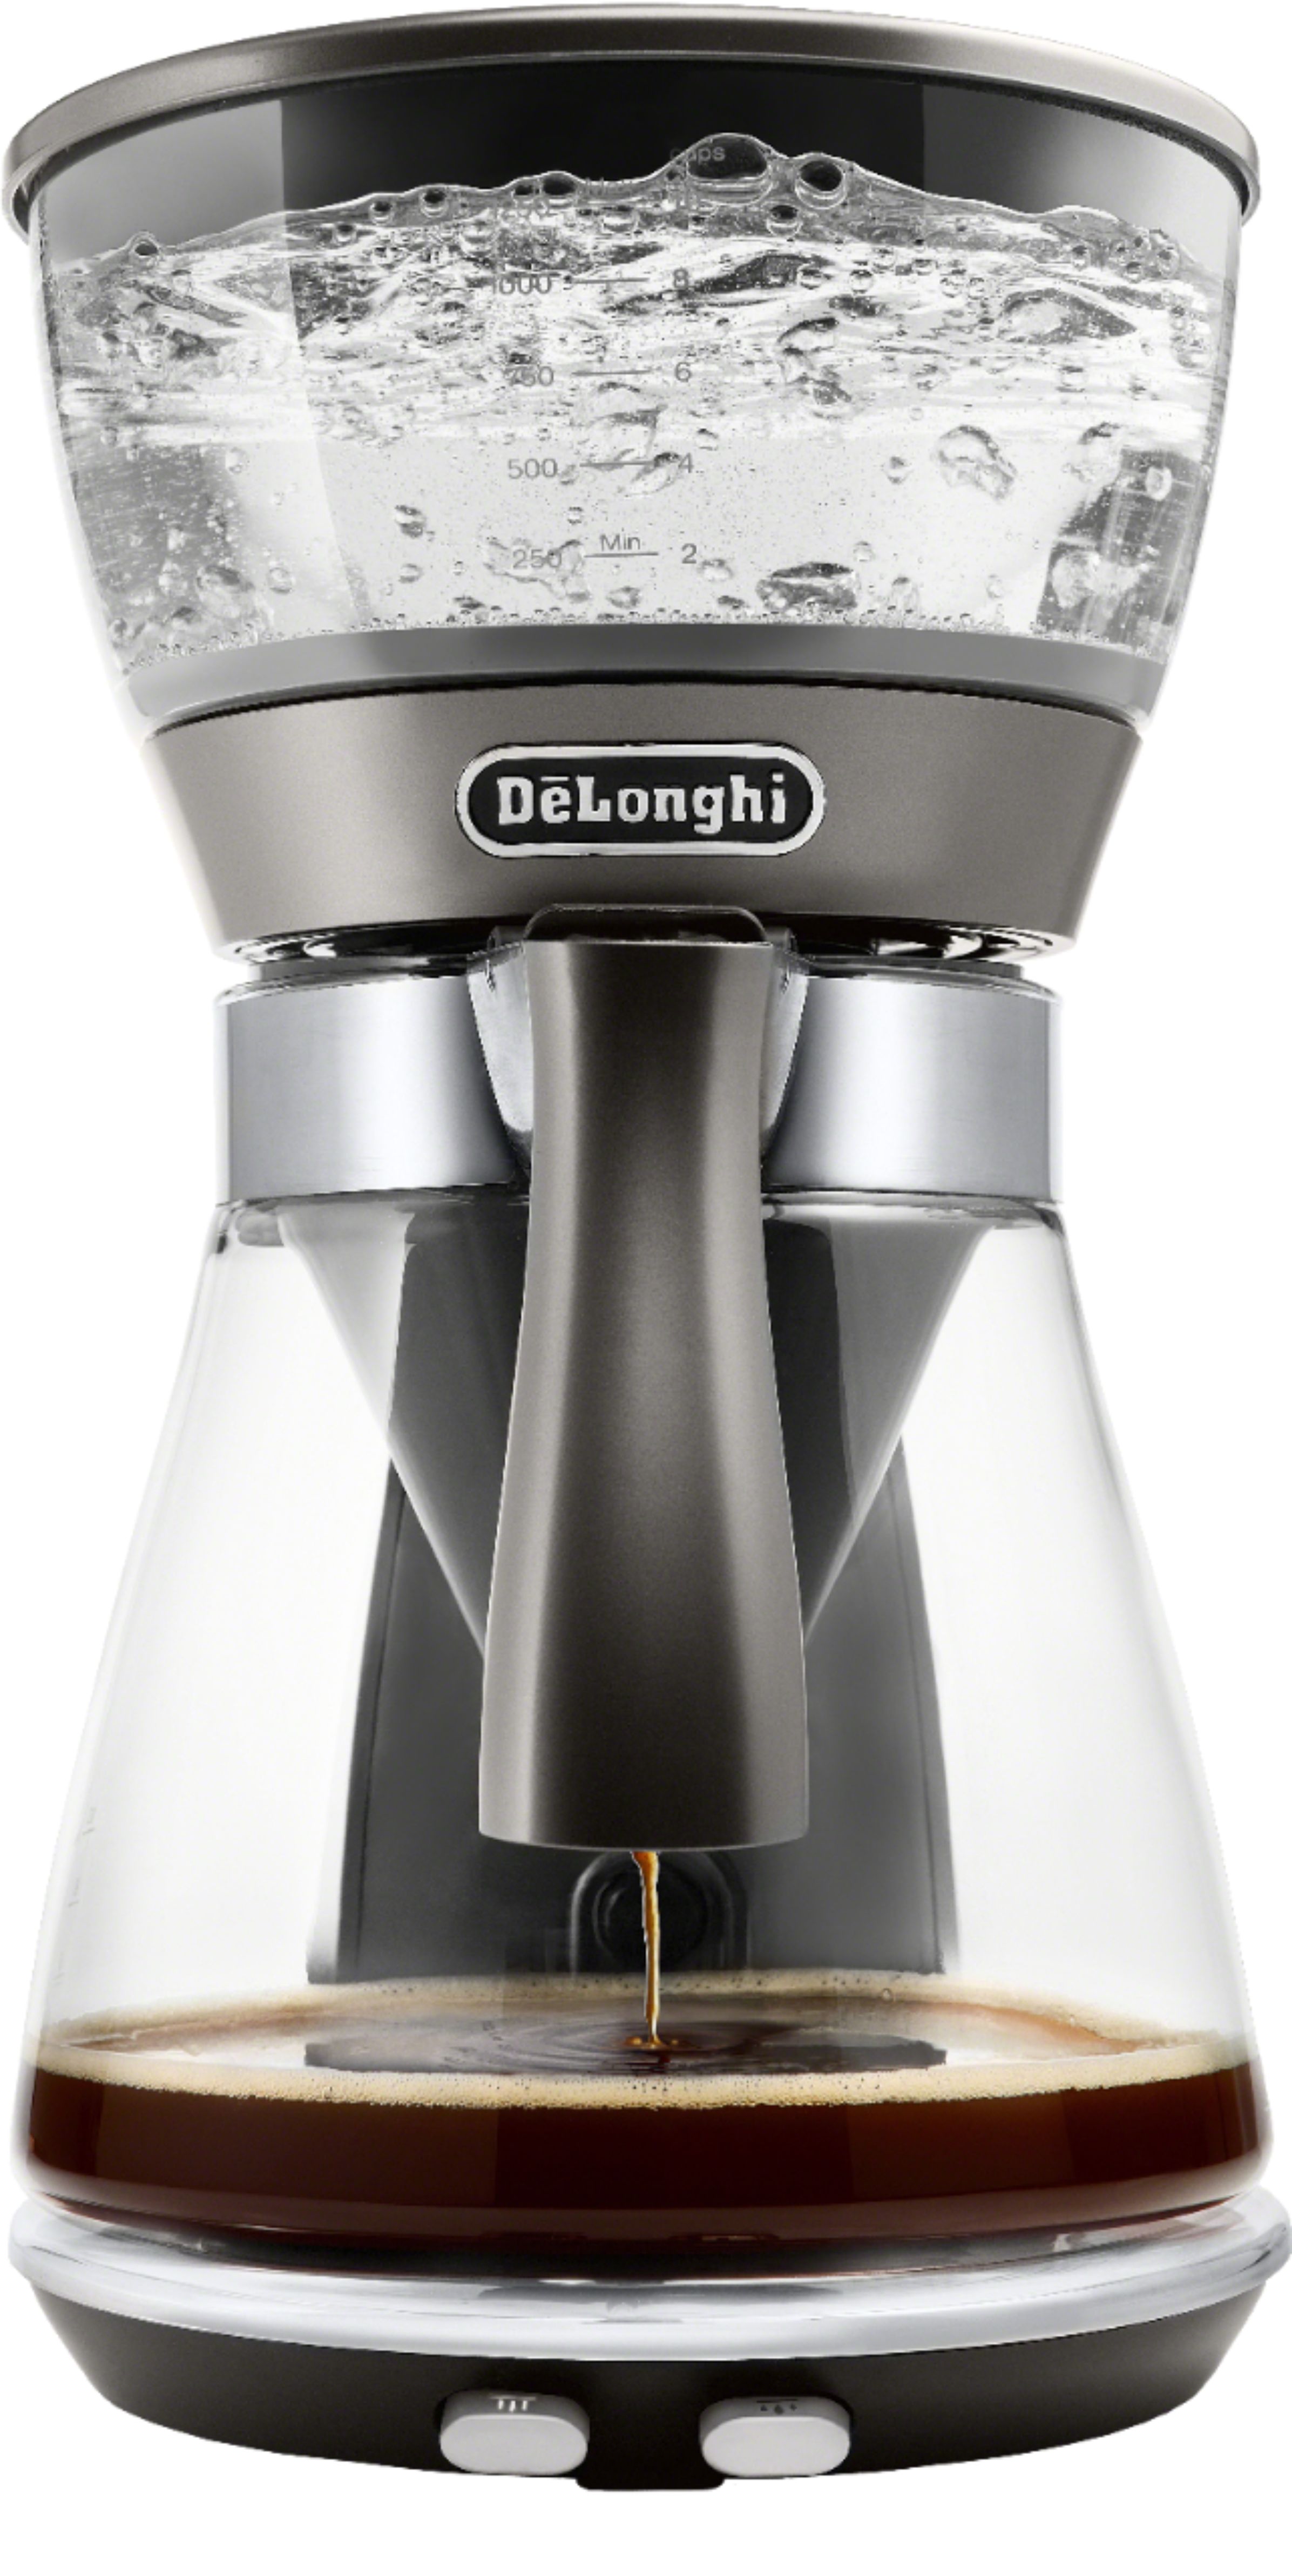 8 cup coffee maker